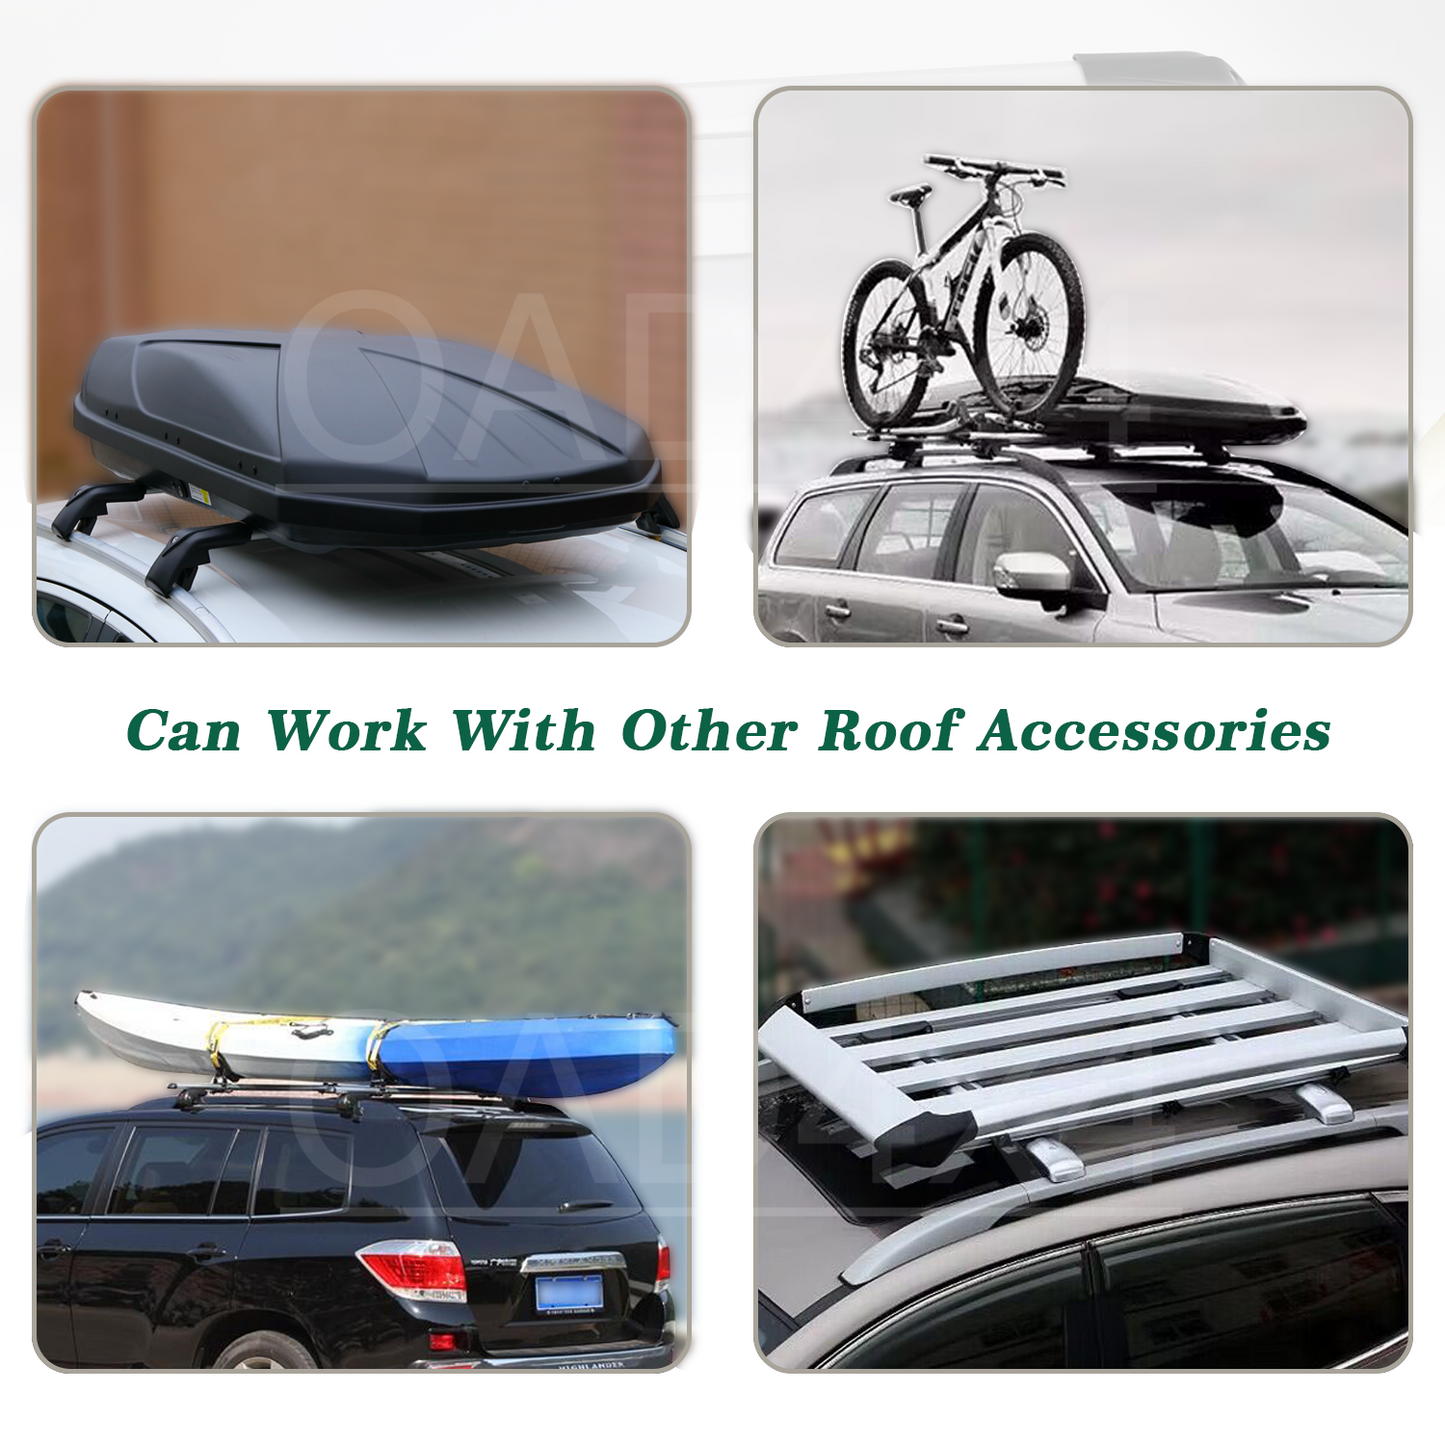 1 Pair Aluminum Silver Cross Bar Roof Racks Baggage holder for BMW 3 series E46 Wagon 98-06 with raised roof rail